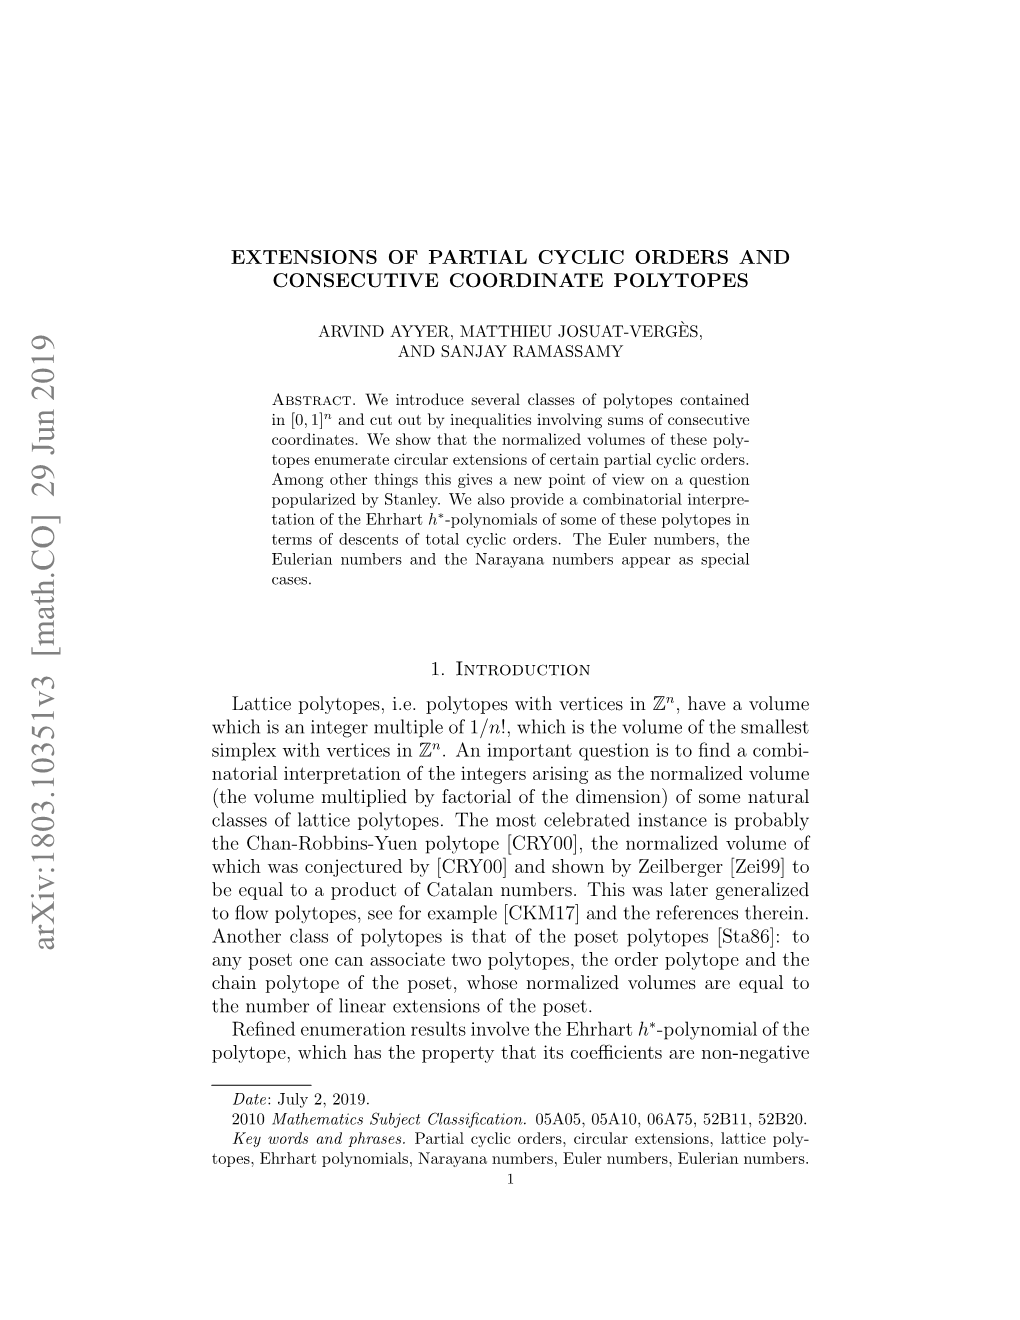 Extensions of Partial Cyclic Orders and Consecutive Coordinate Polytopes